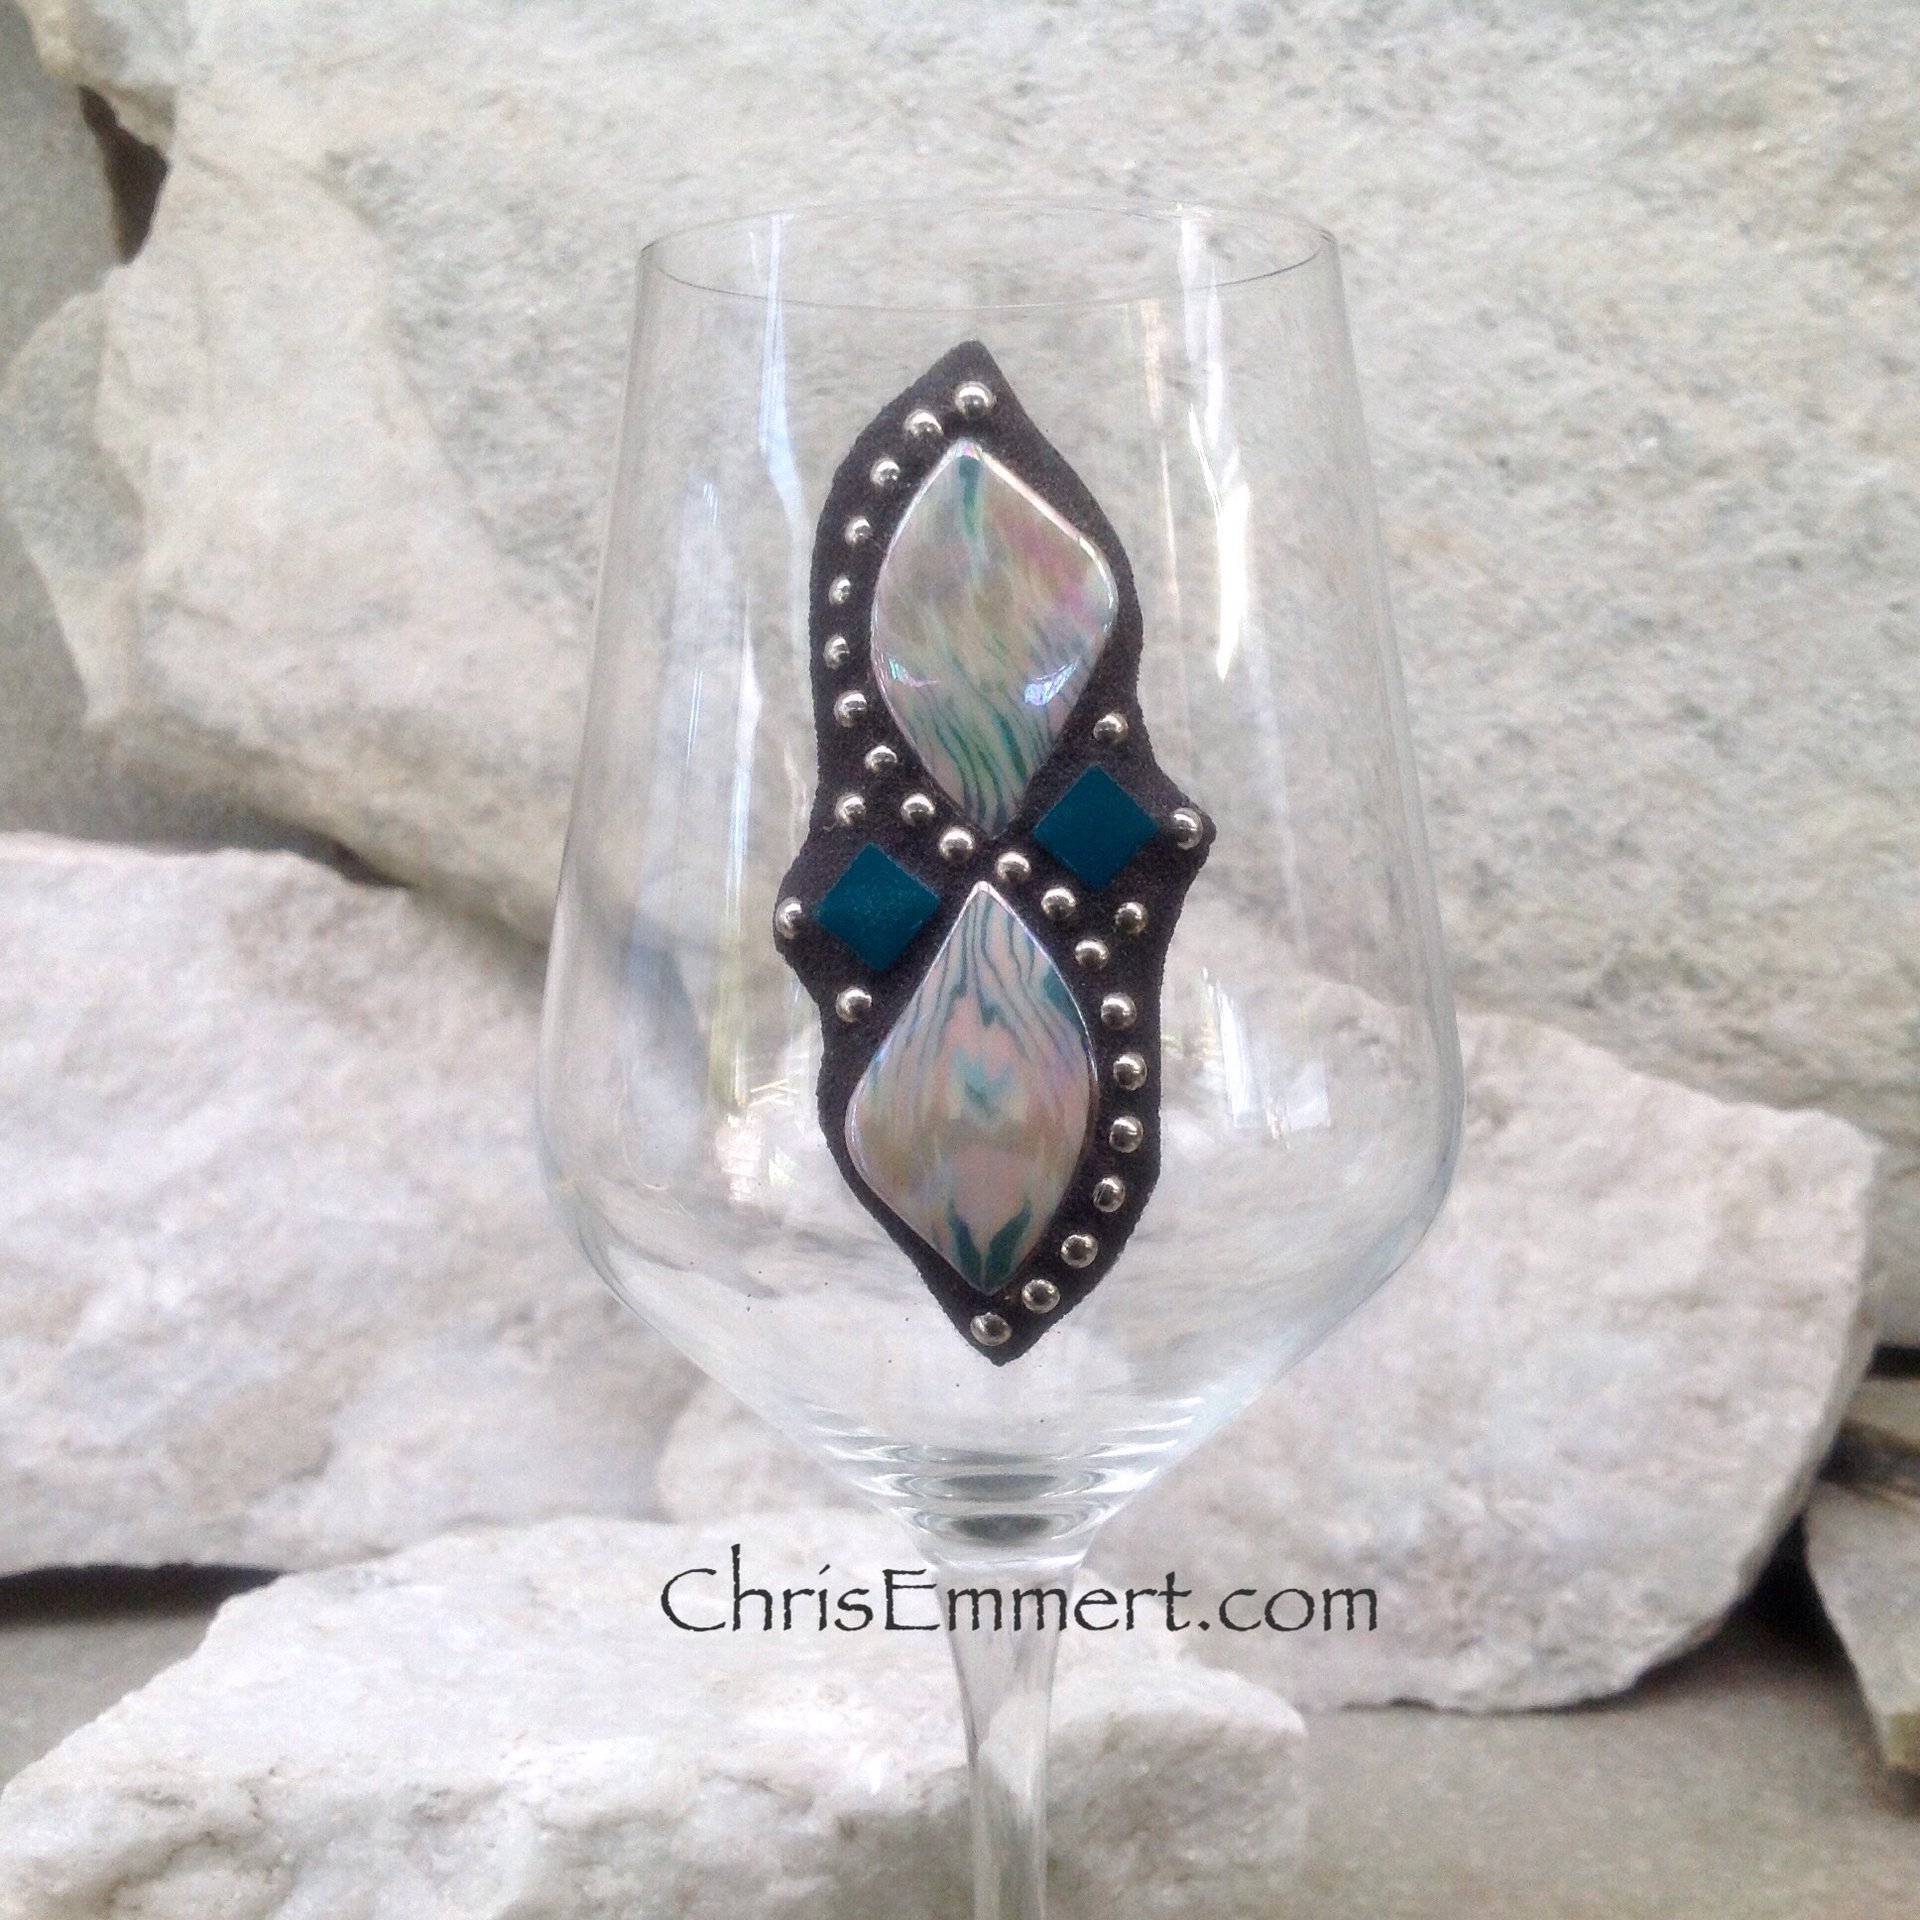 Iridescent White/Pink/Teal and Black Wine Glass Pair